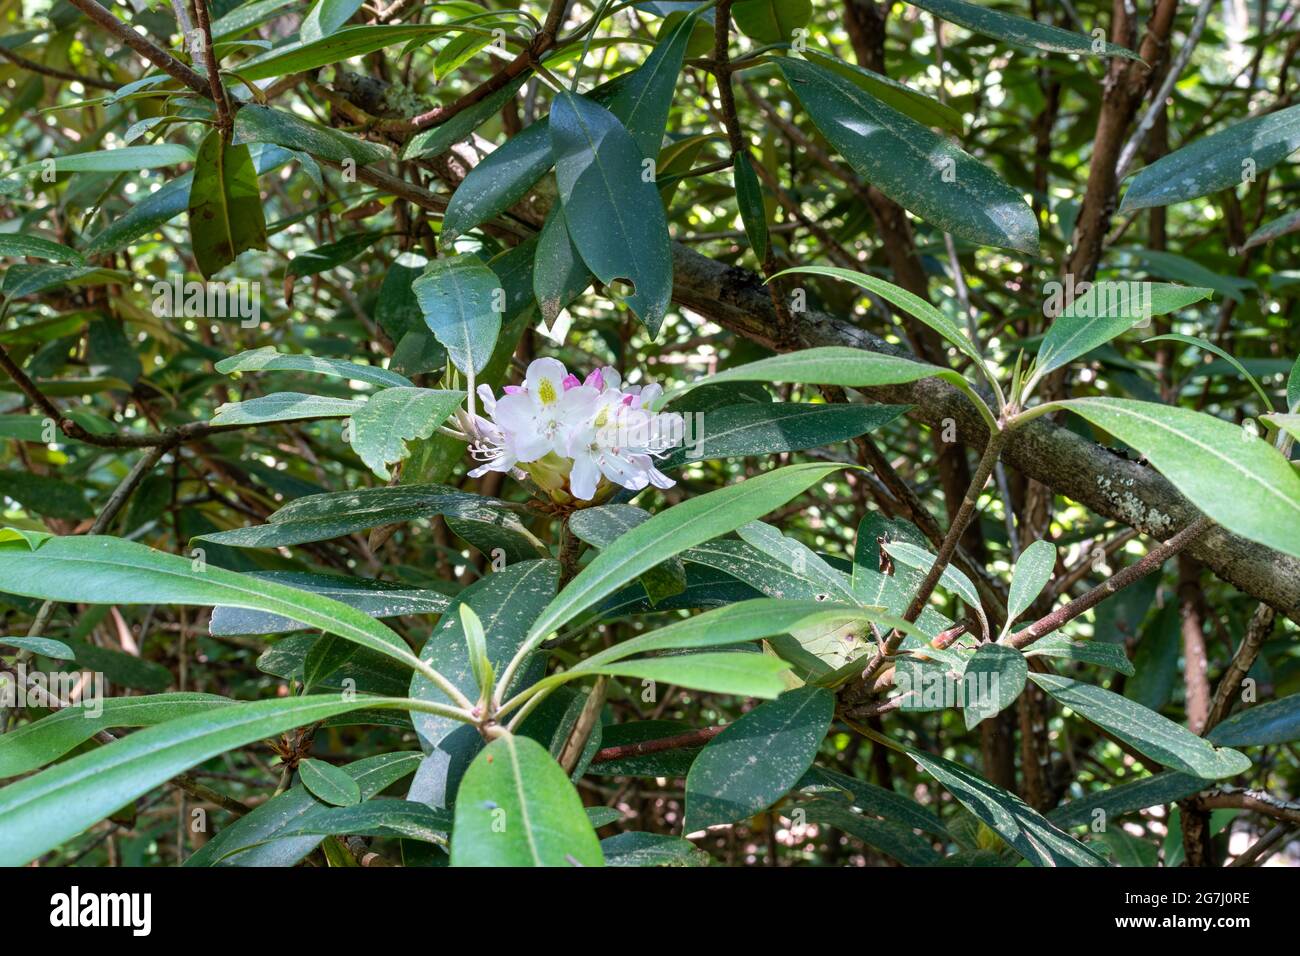 Rhododendron flowers blooming in an old growth forest Stock Photo